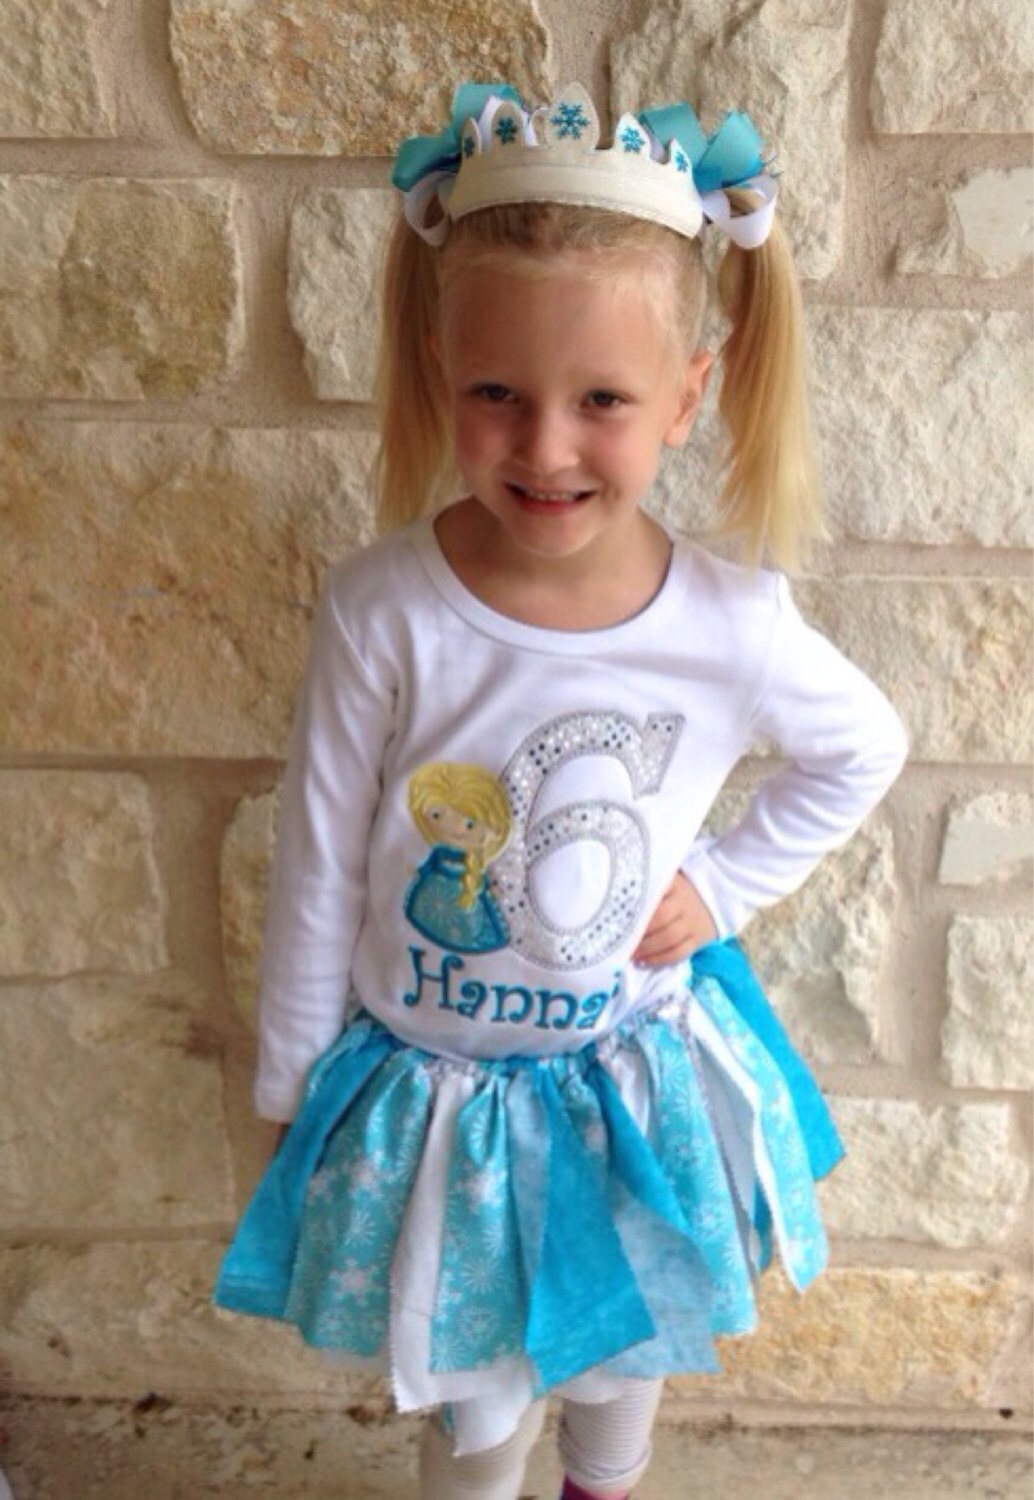 Frozen Inspired Birthday Appliquéd Tee Your choice of number or letter